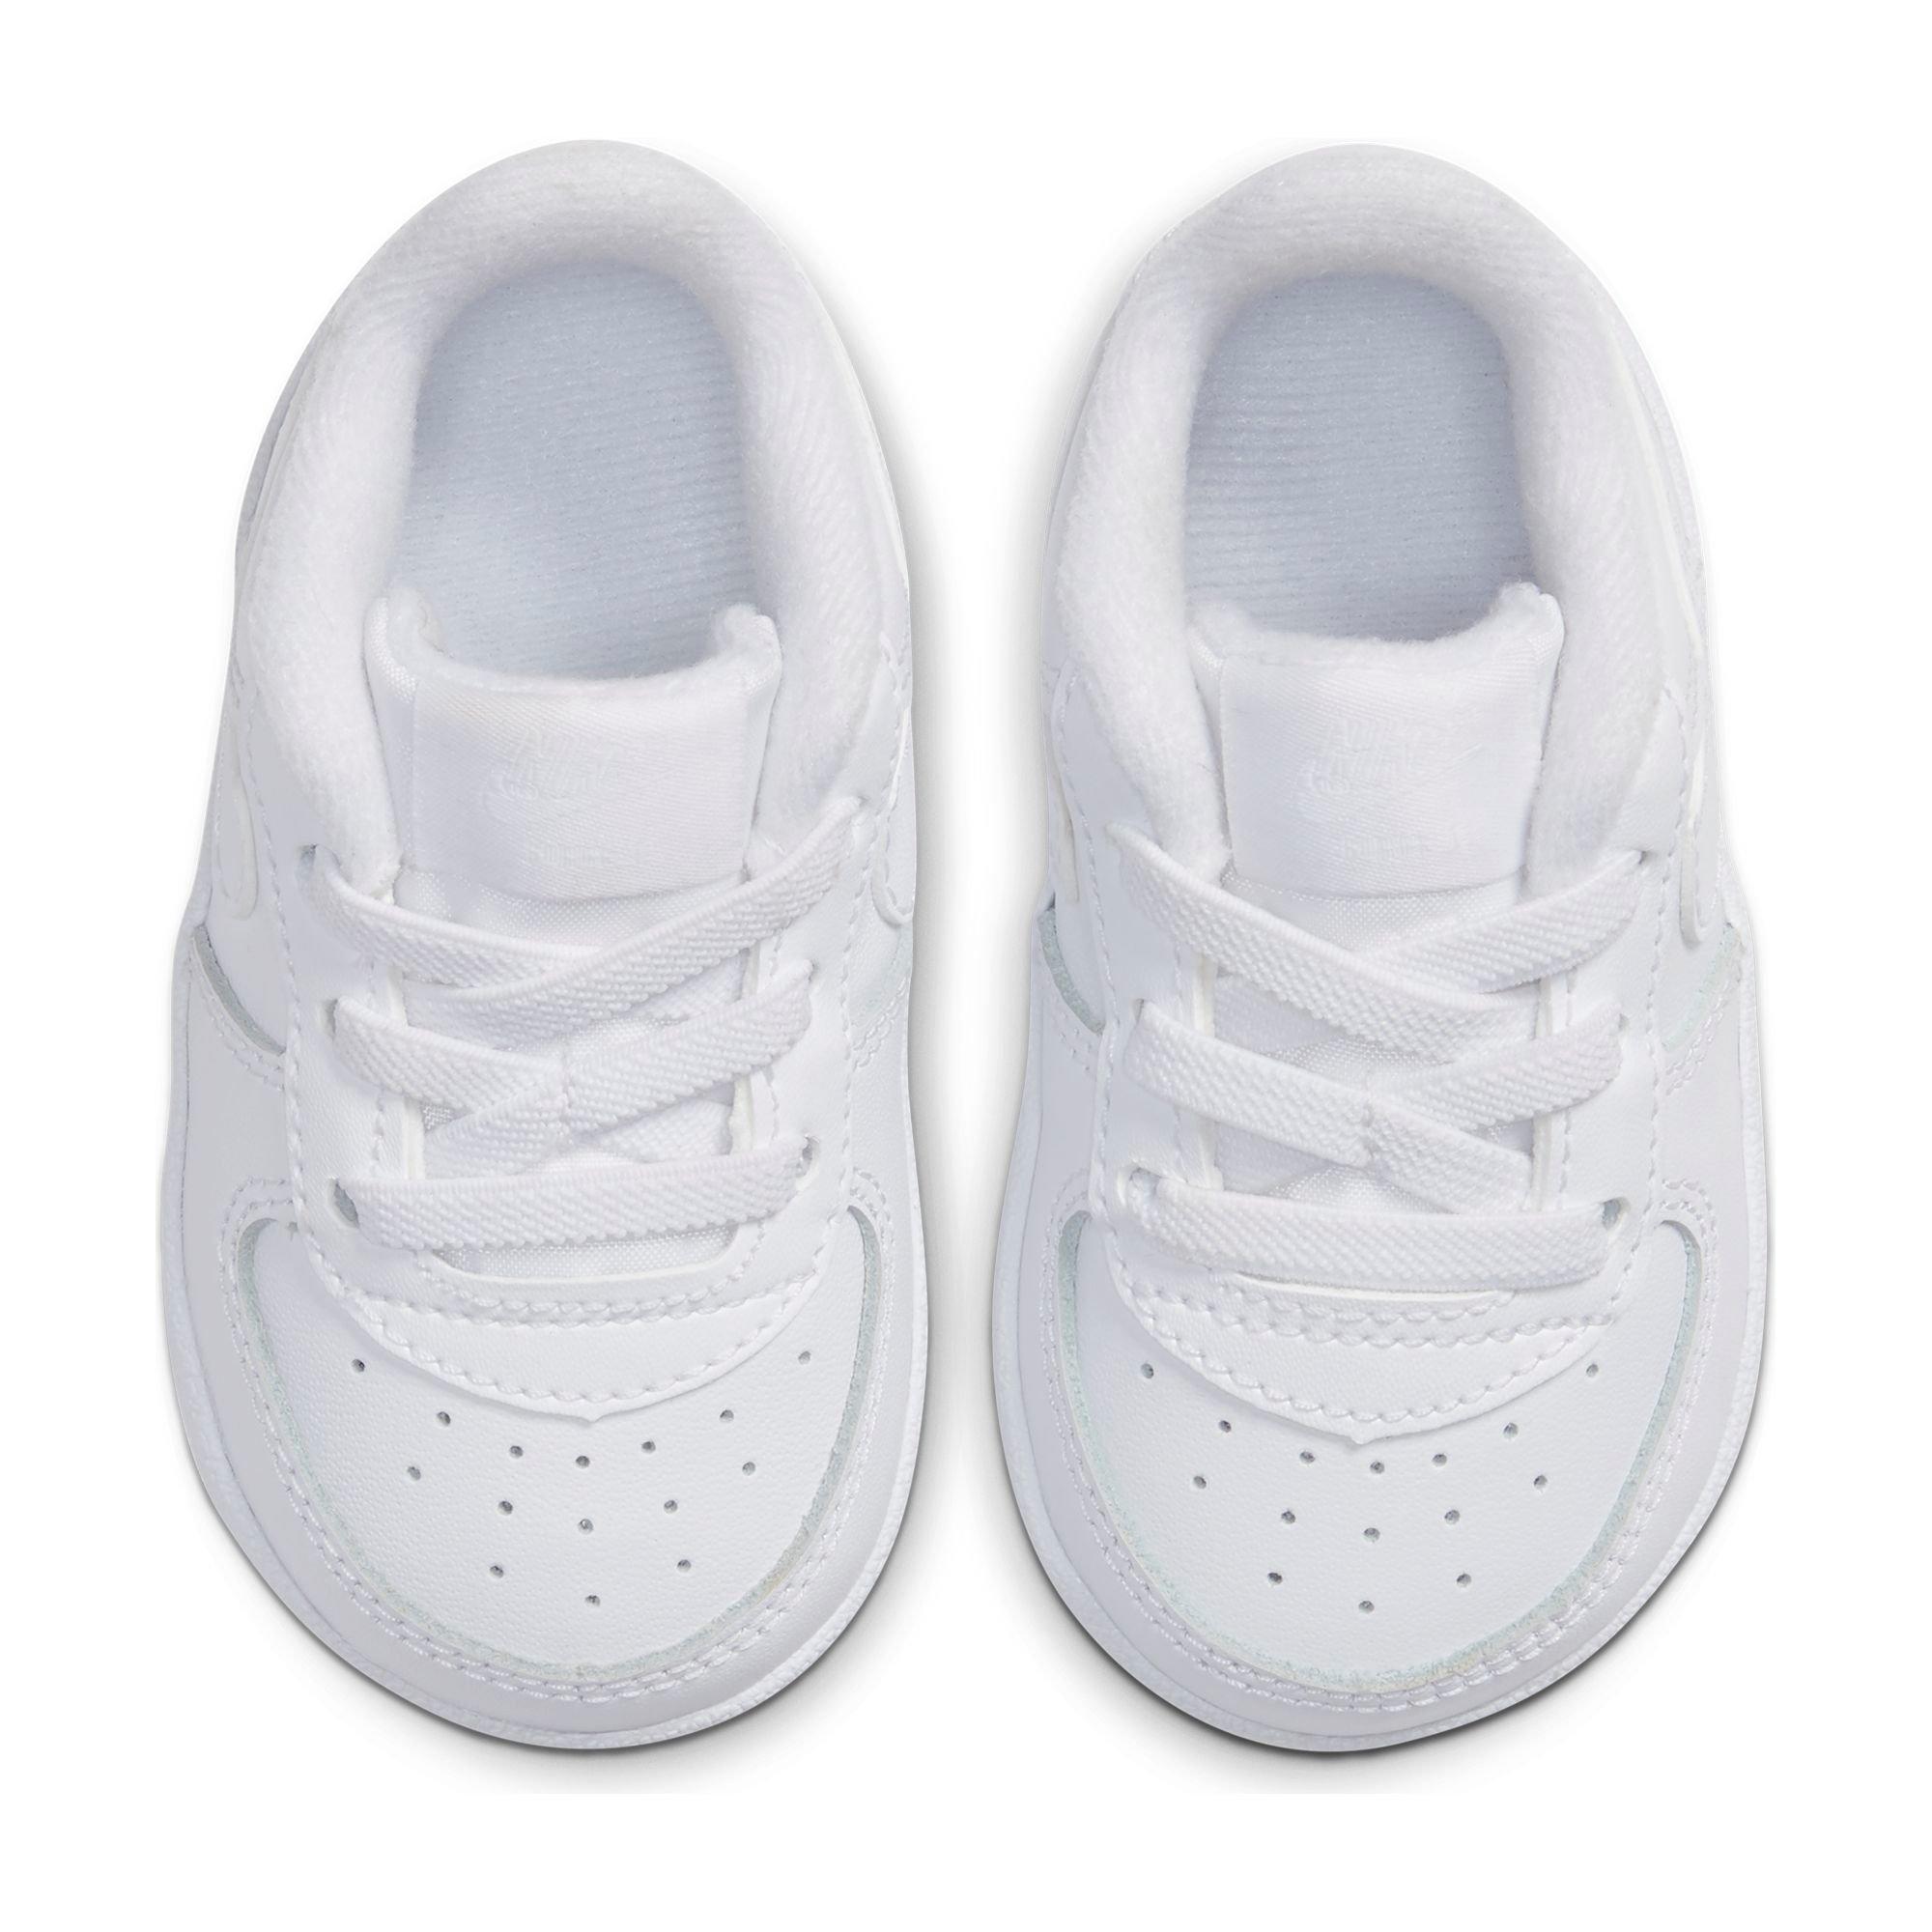 air force ones crib shoes